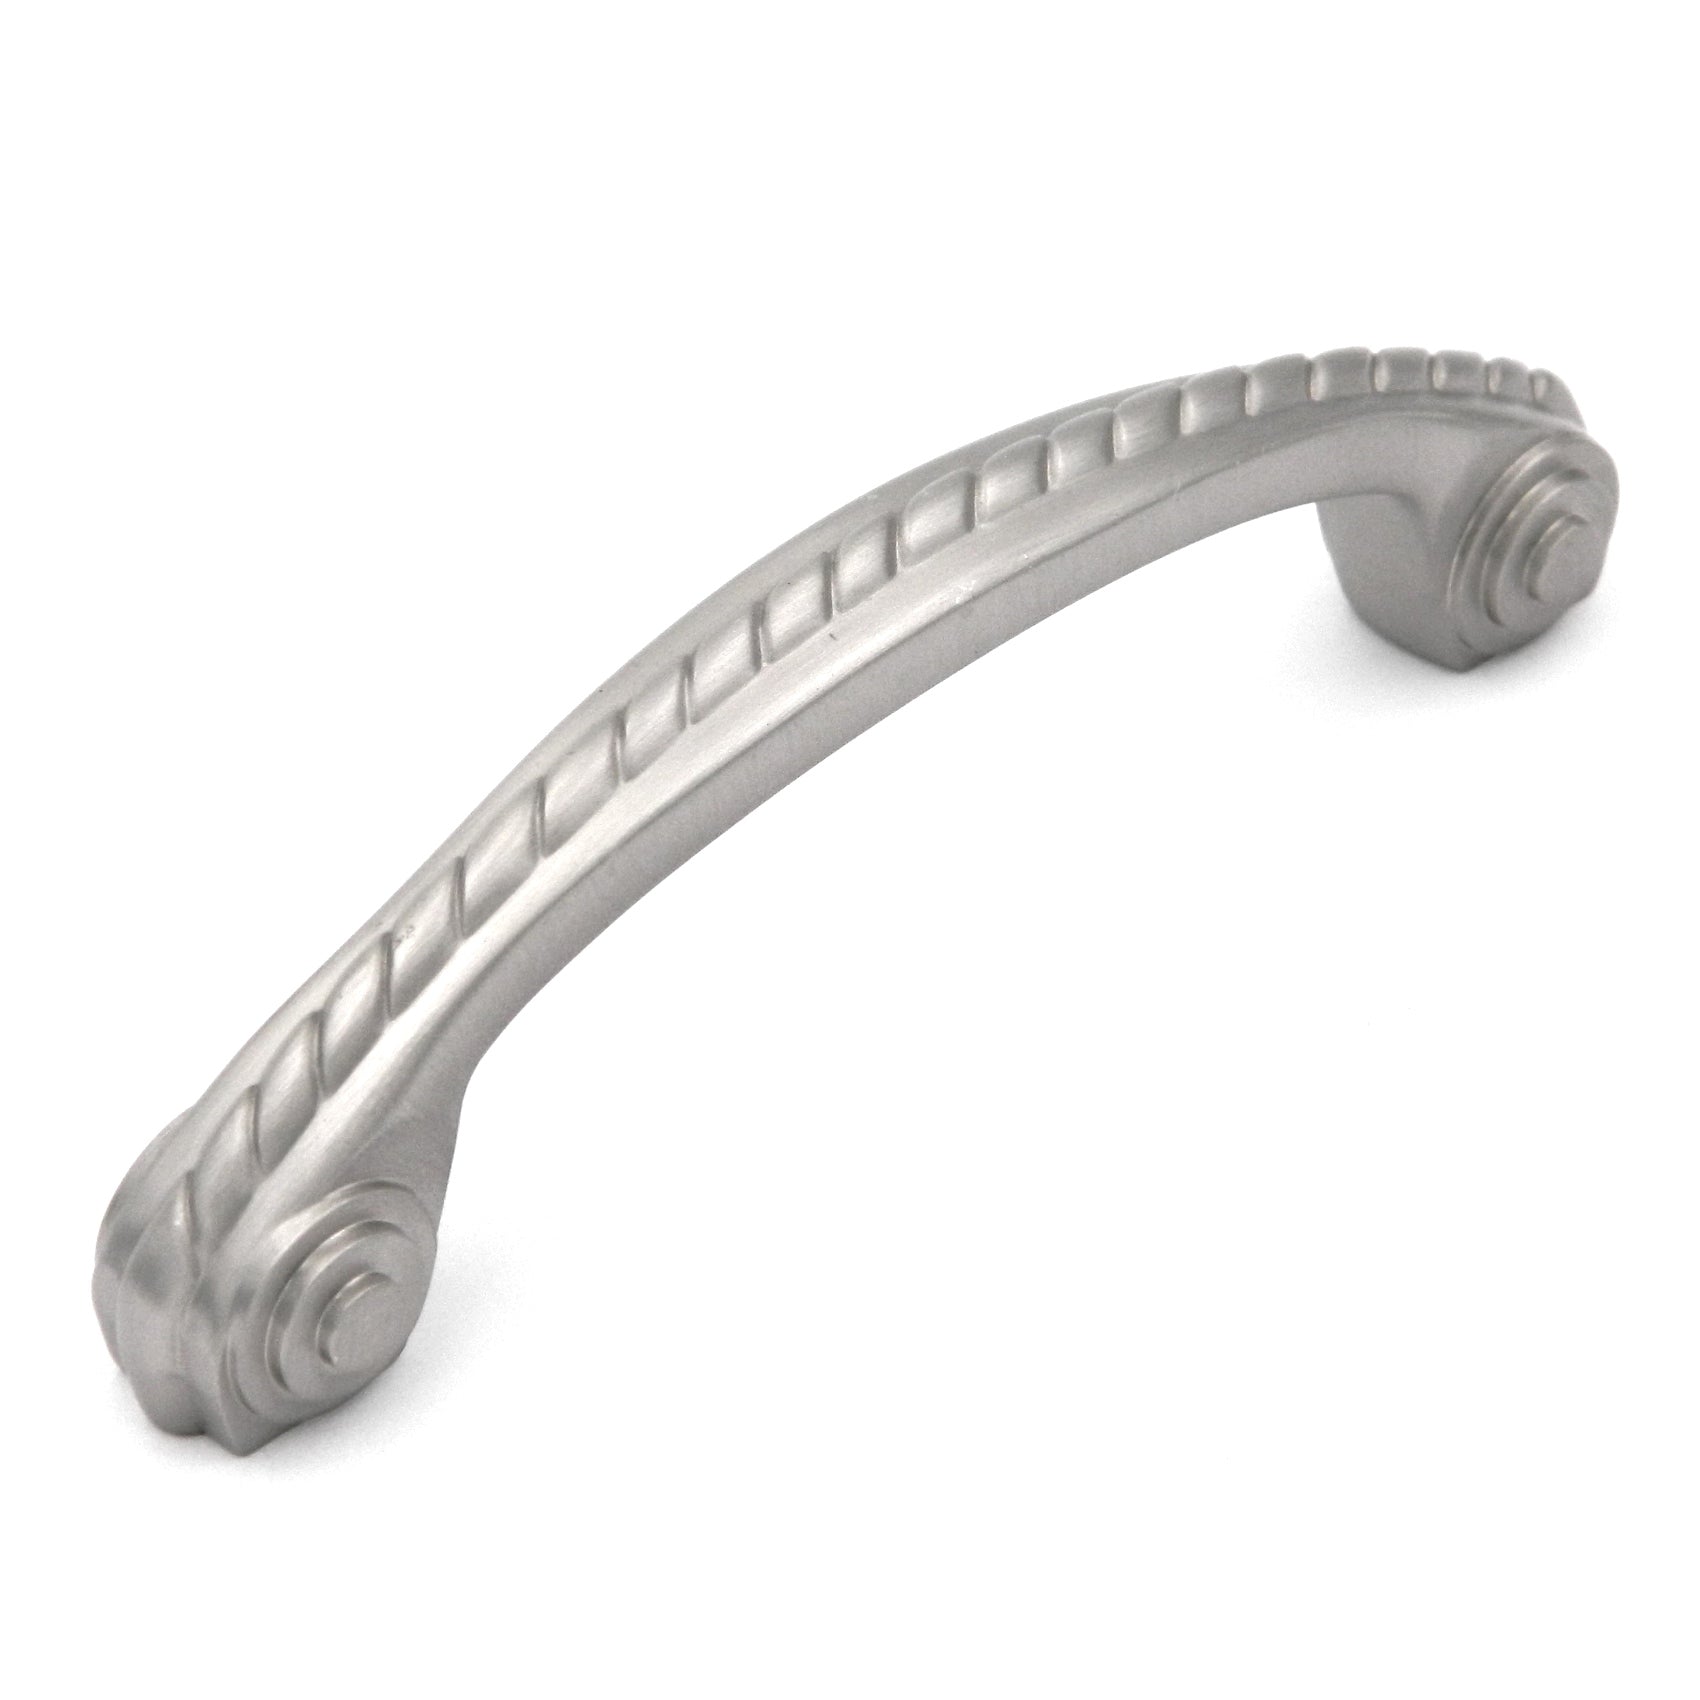 Hickory Hardware Annapolis Satin Nickel P415 3 3/4" (96mm)cc Solid Brass Rope Cabinet Handle Pull